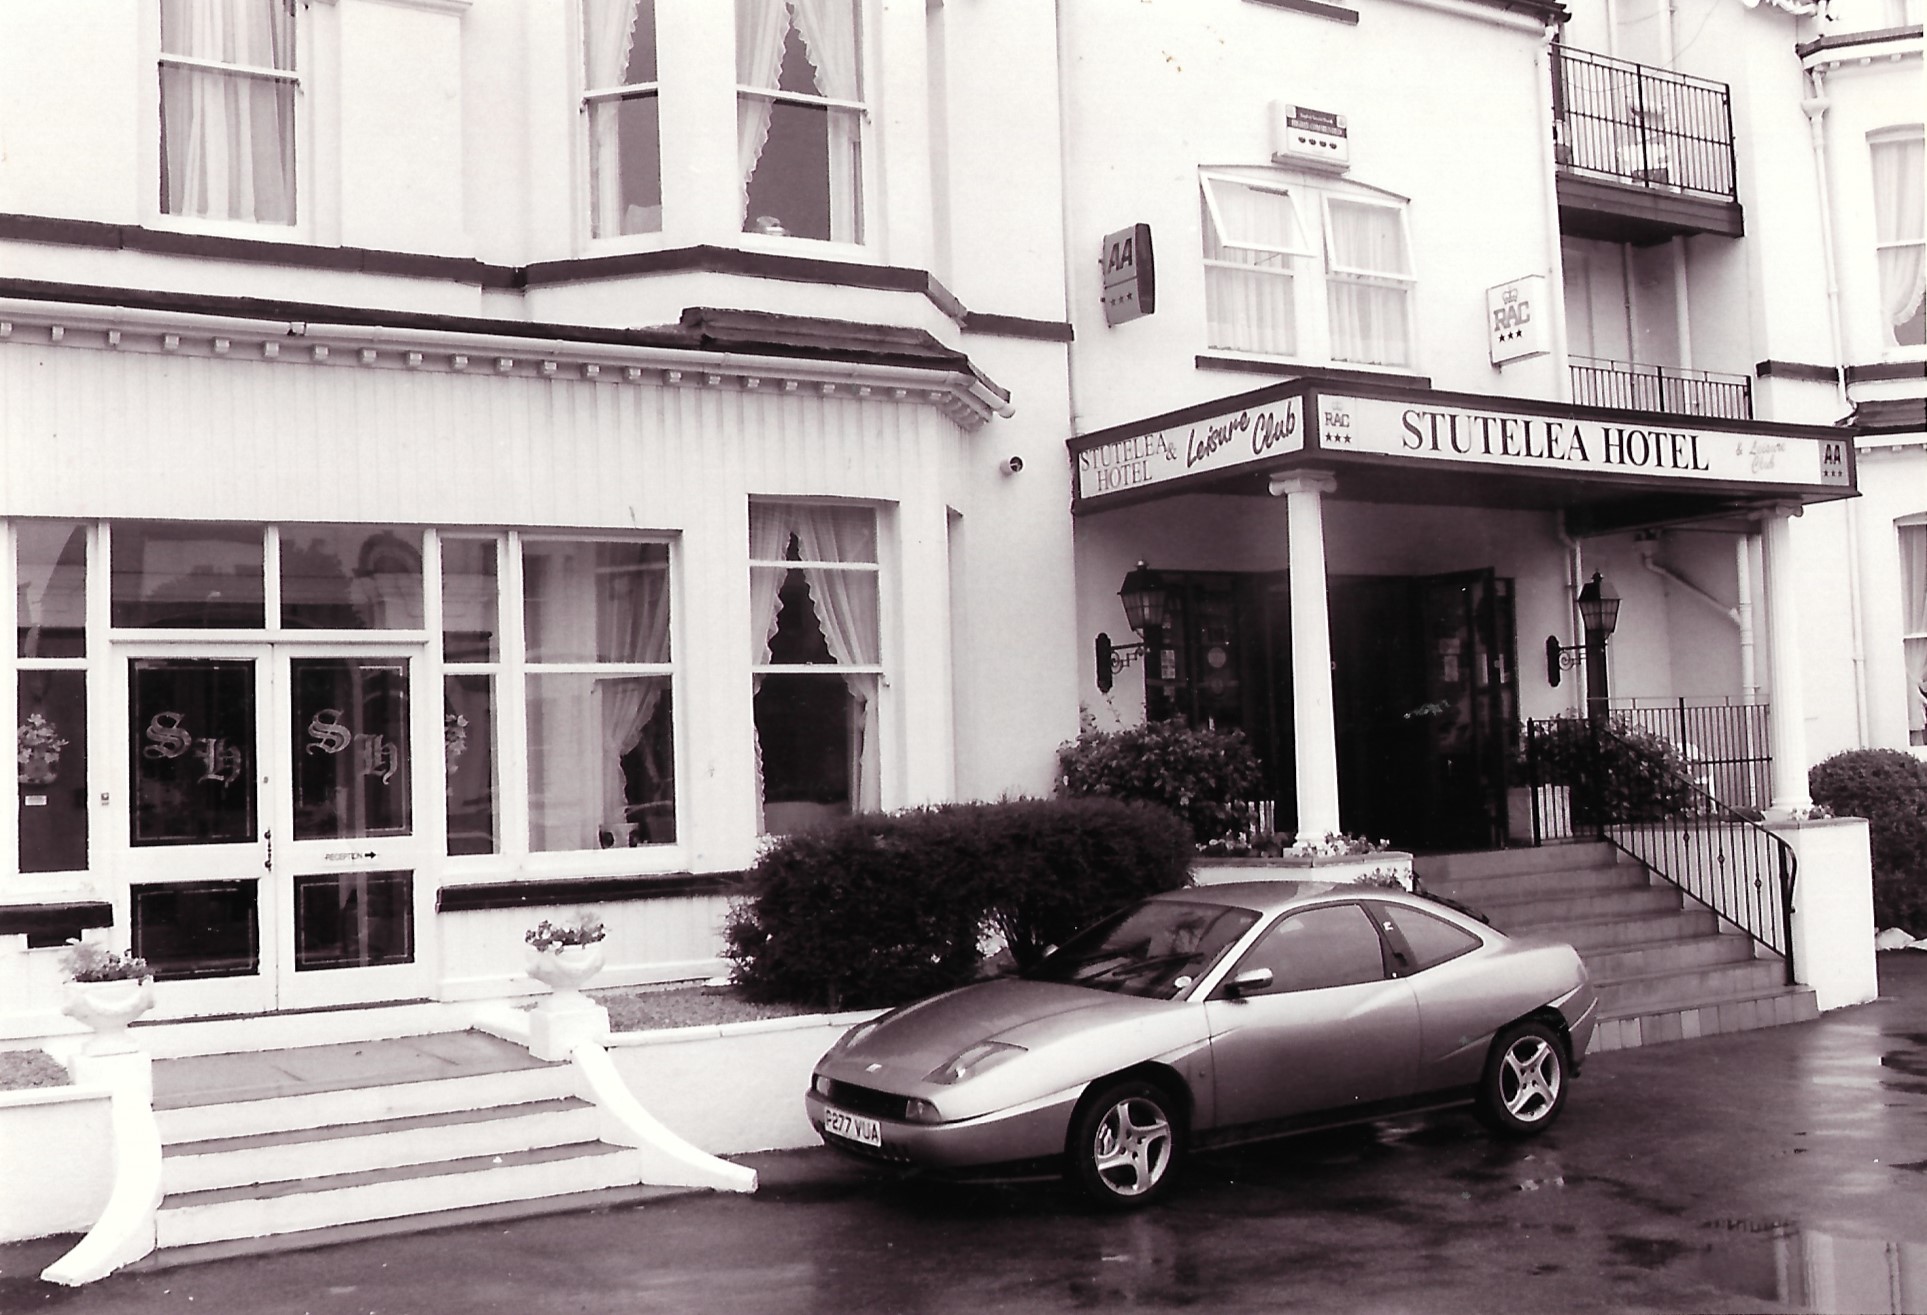 The Stutelea Hotel and Leisure Club on Alexandra Road in Southport in the 1980s